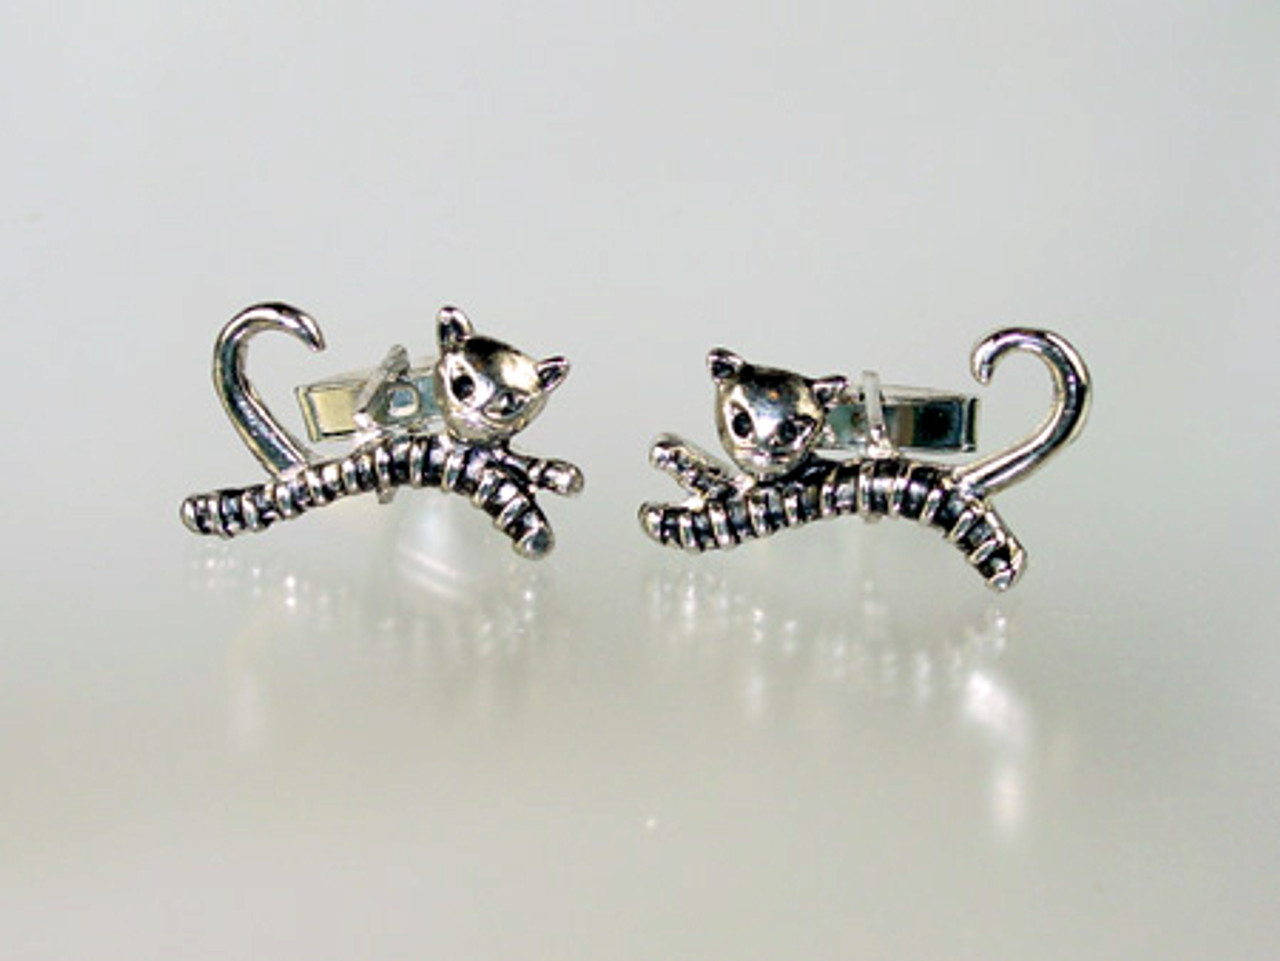 Whimsical  Cats Cufflinks